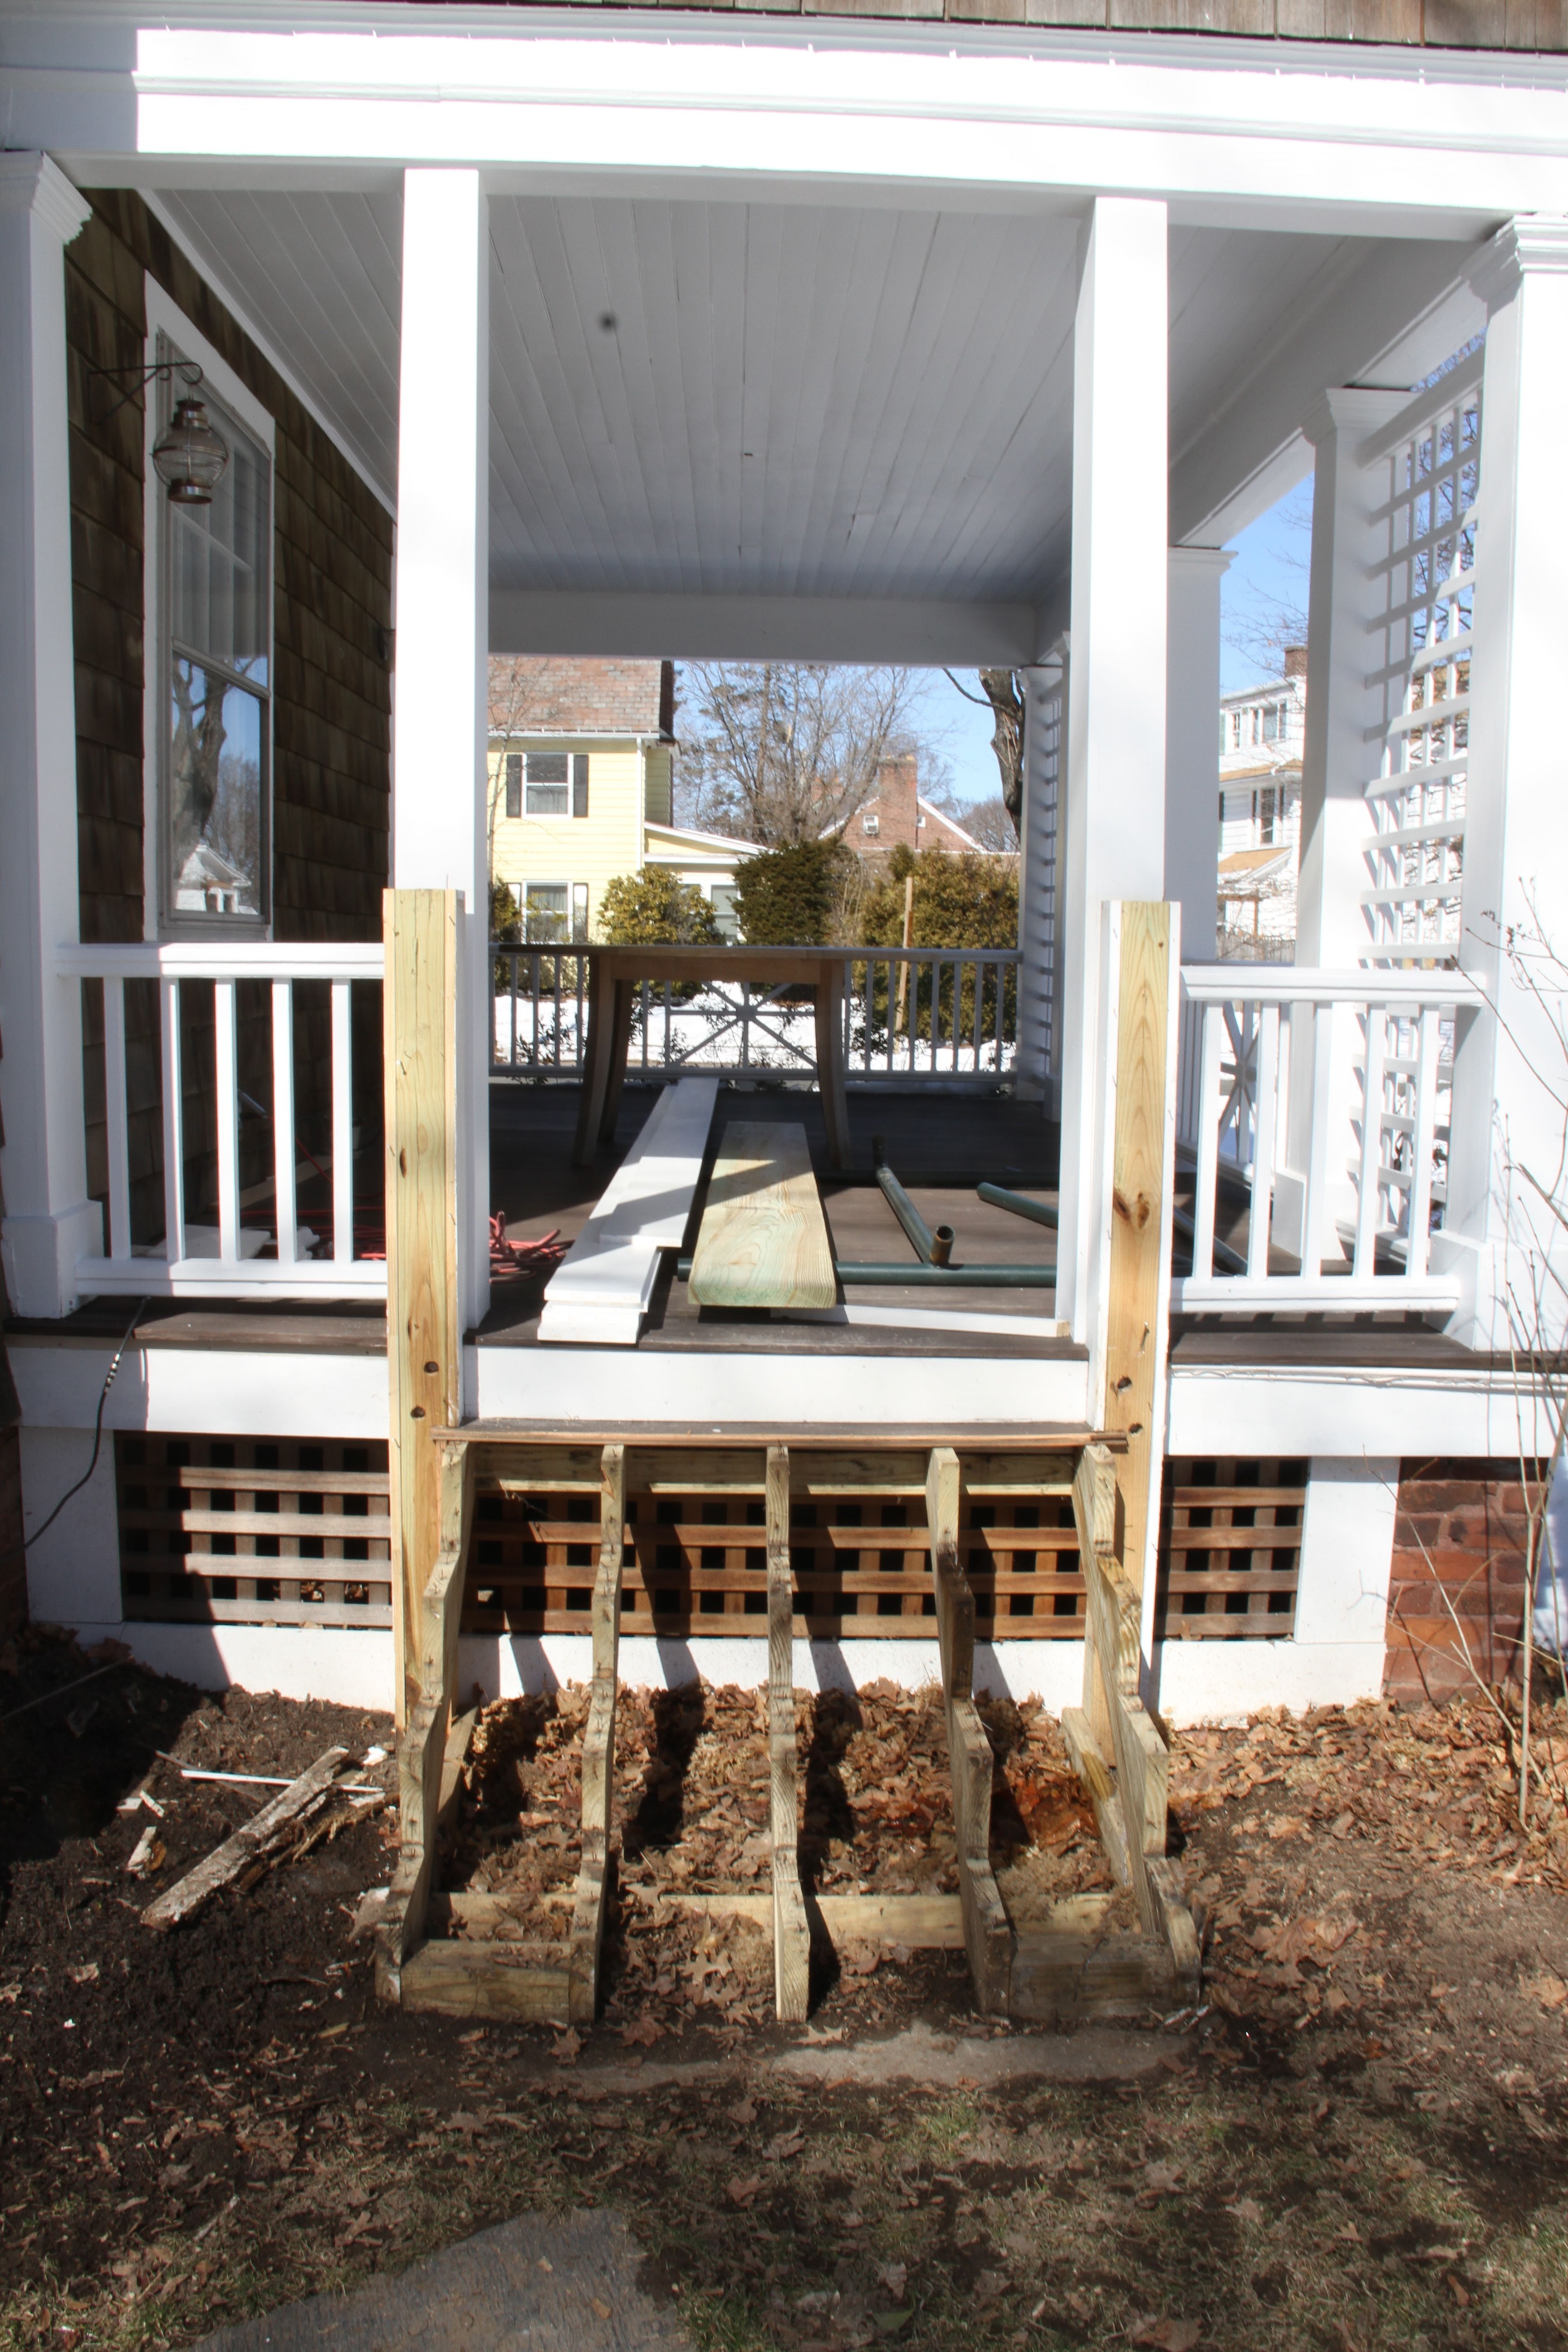 DURING/before: so, this porch we paid to have redone when we bought the house in 2006/7. The stairs were wrapped in pine (bad idea!) and were already rotting. Enter Team Carpentry.